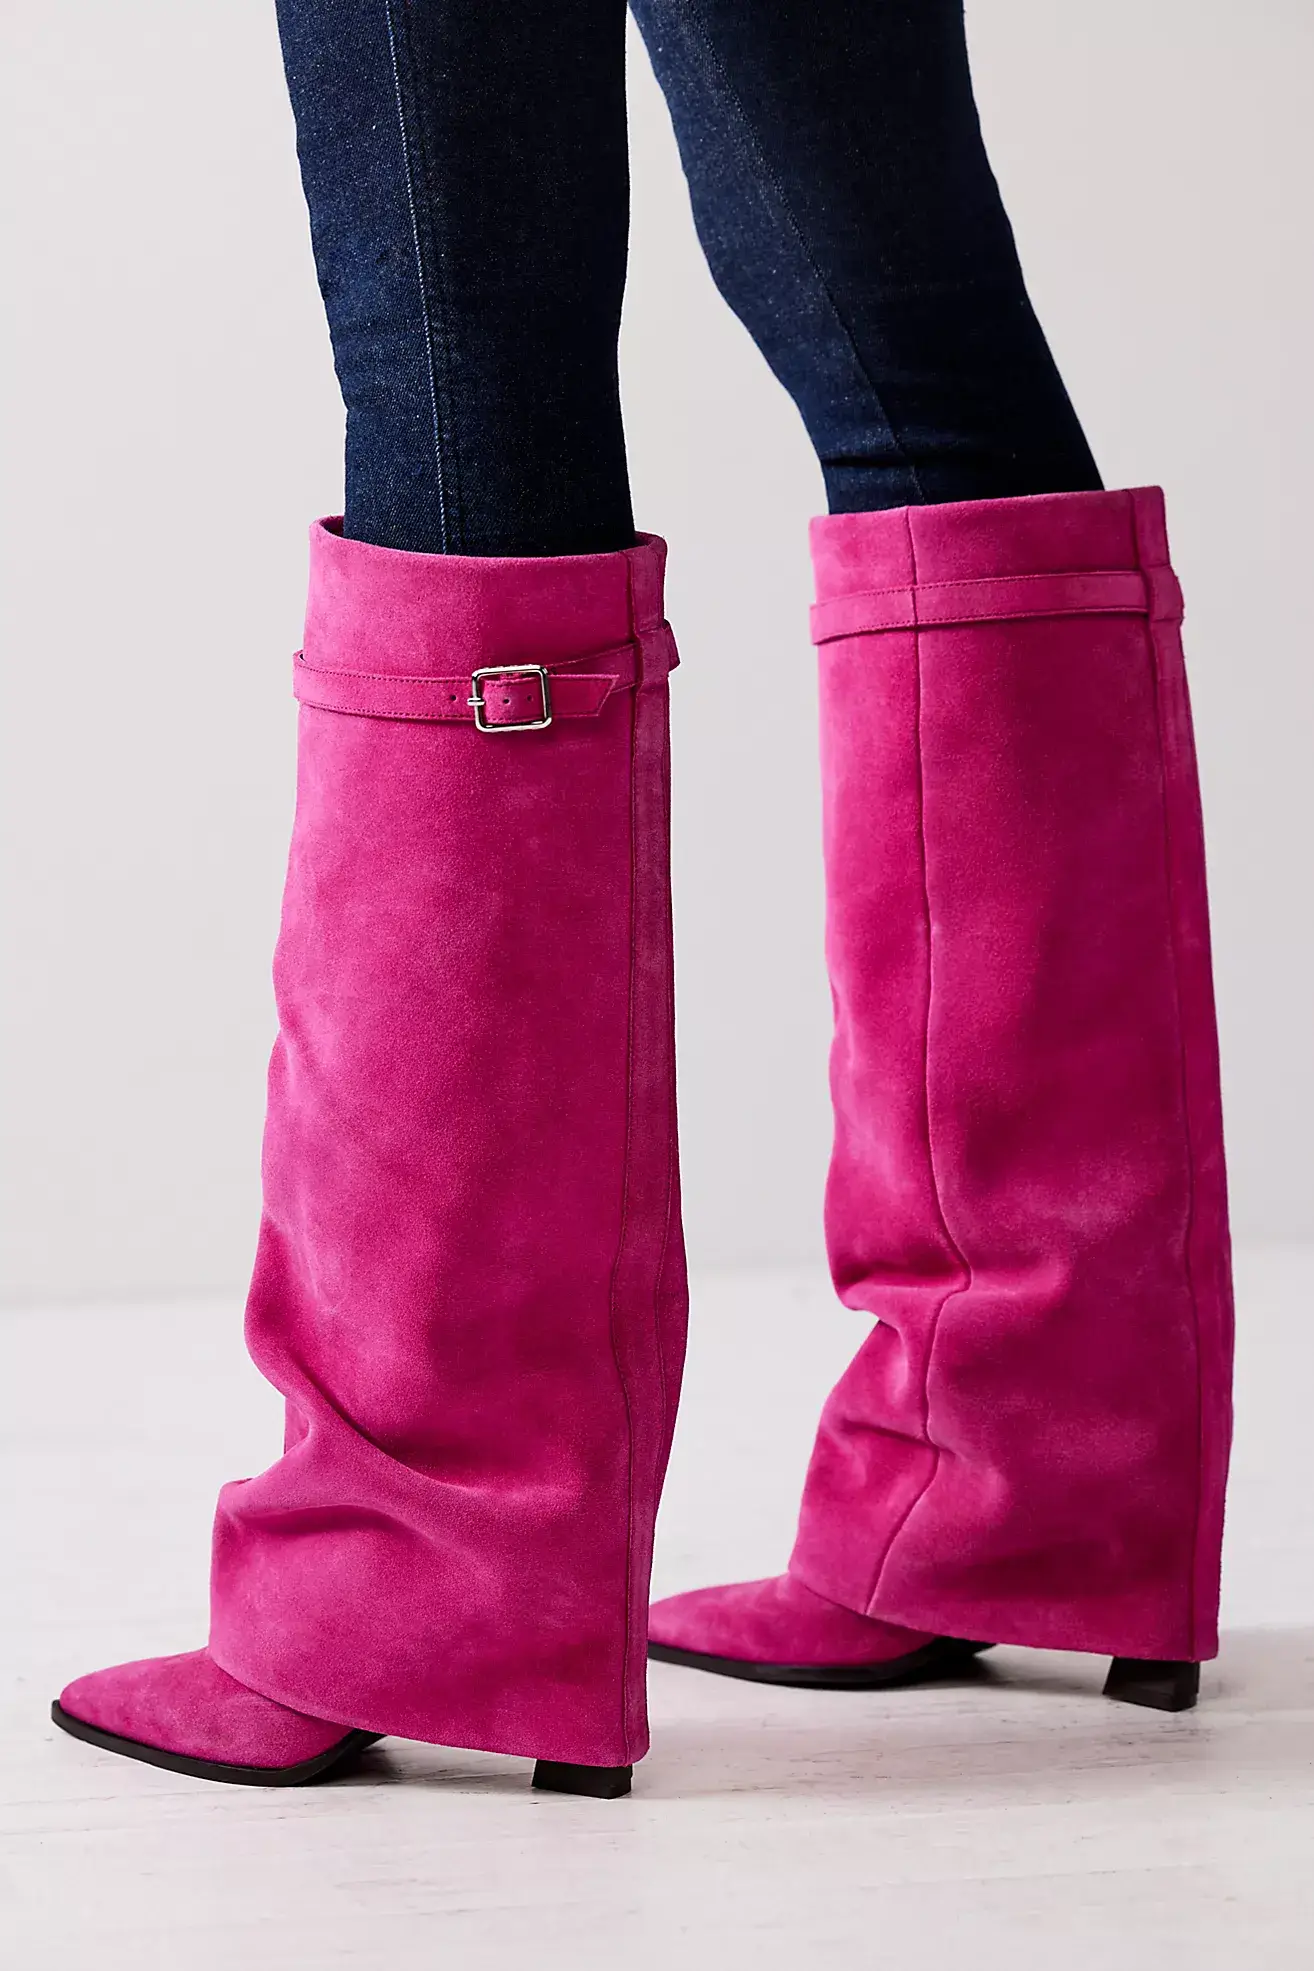 Magenta Suede Foldover Boots must have boots for fall the best fall boots personal stylists share favorite fall boots the best suede boots how to wear brightly colored boots how to add color to your look with boots trendy boots for fall and winter